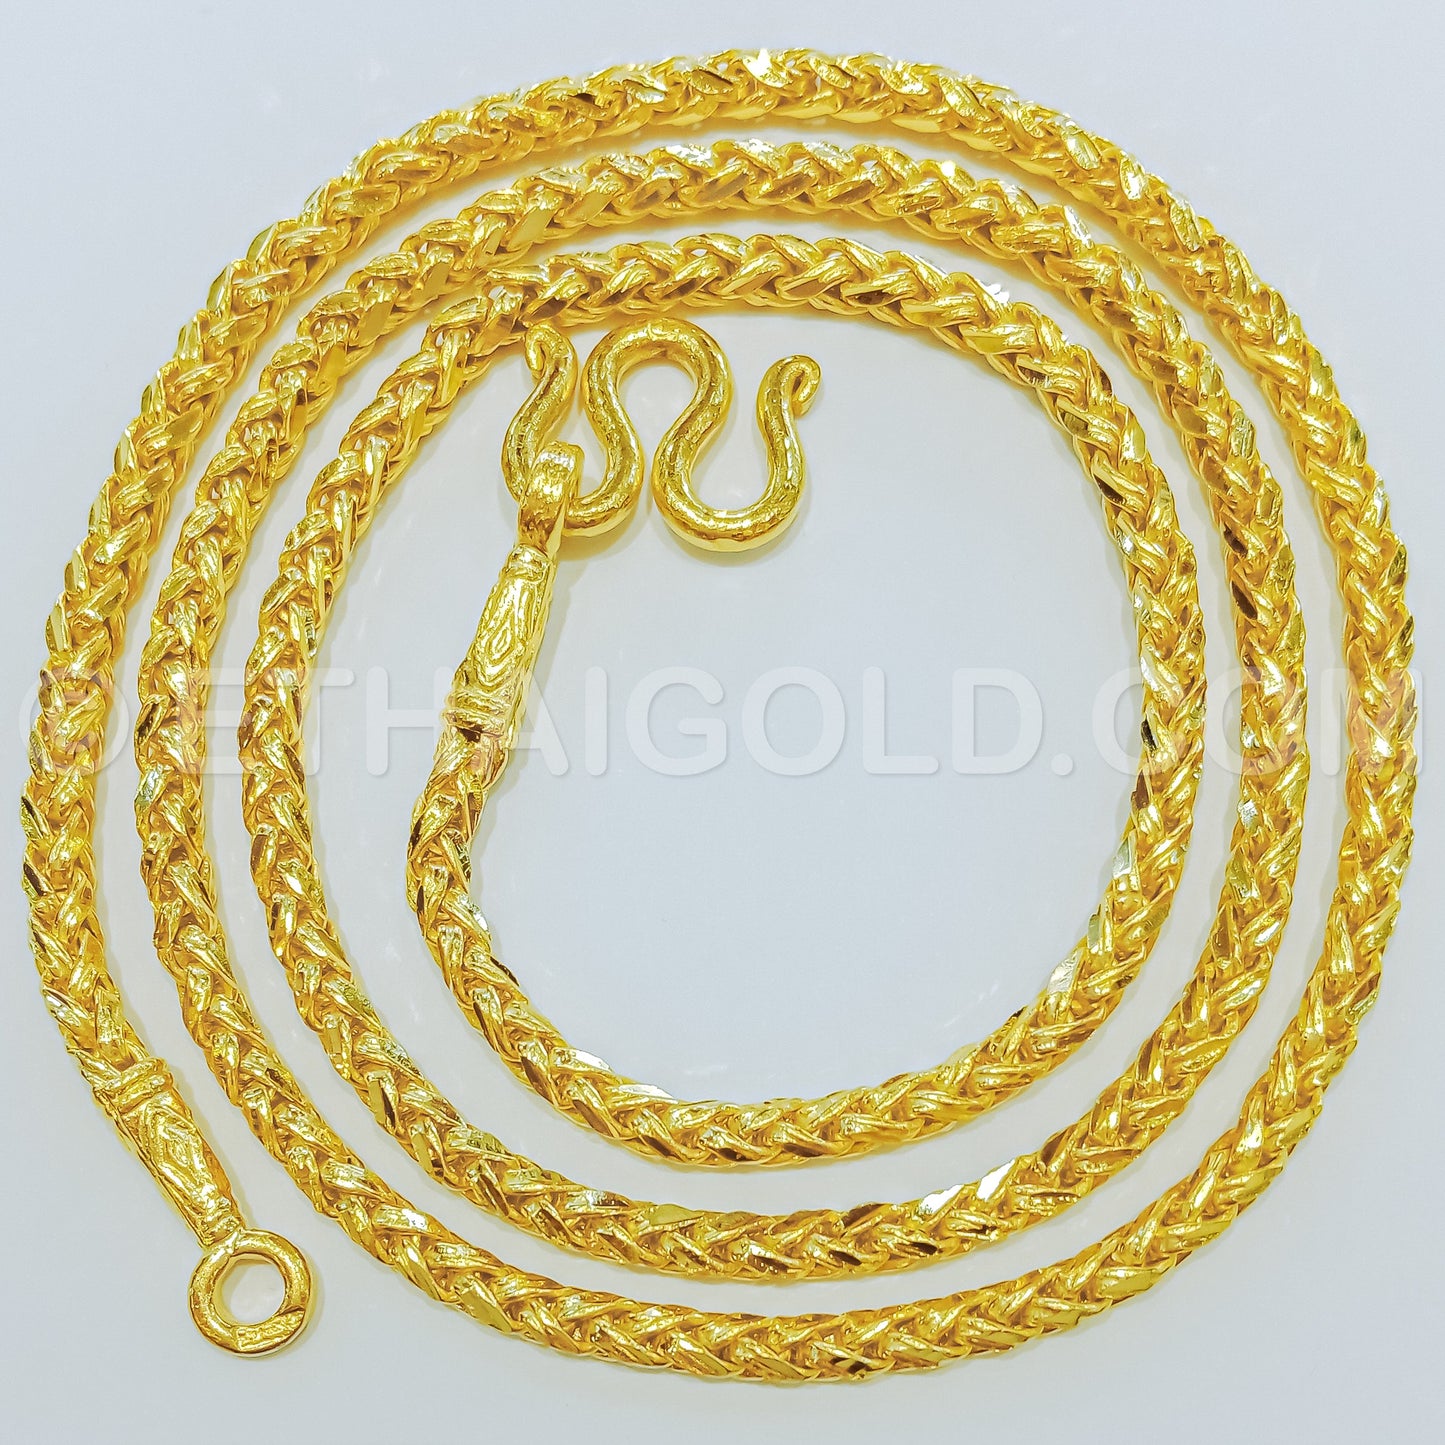 2 BAHT POLISHED DIAMOND-CUT SOLID PALMA CHAIN NECKLACE IN 23K GOLD (ID: N1502B)